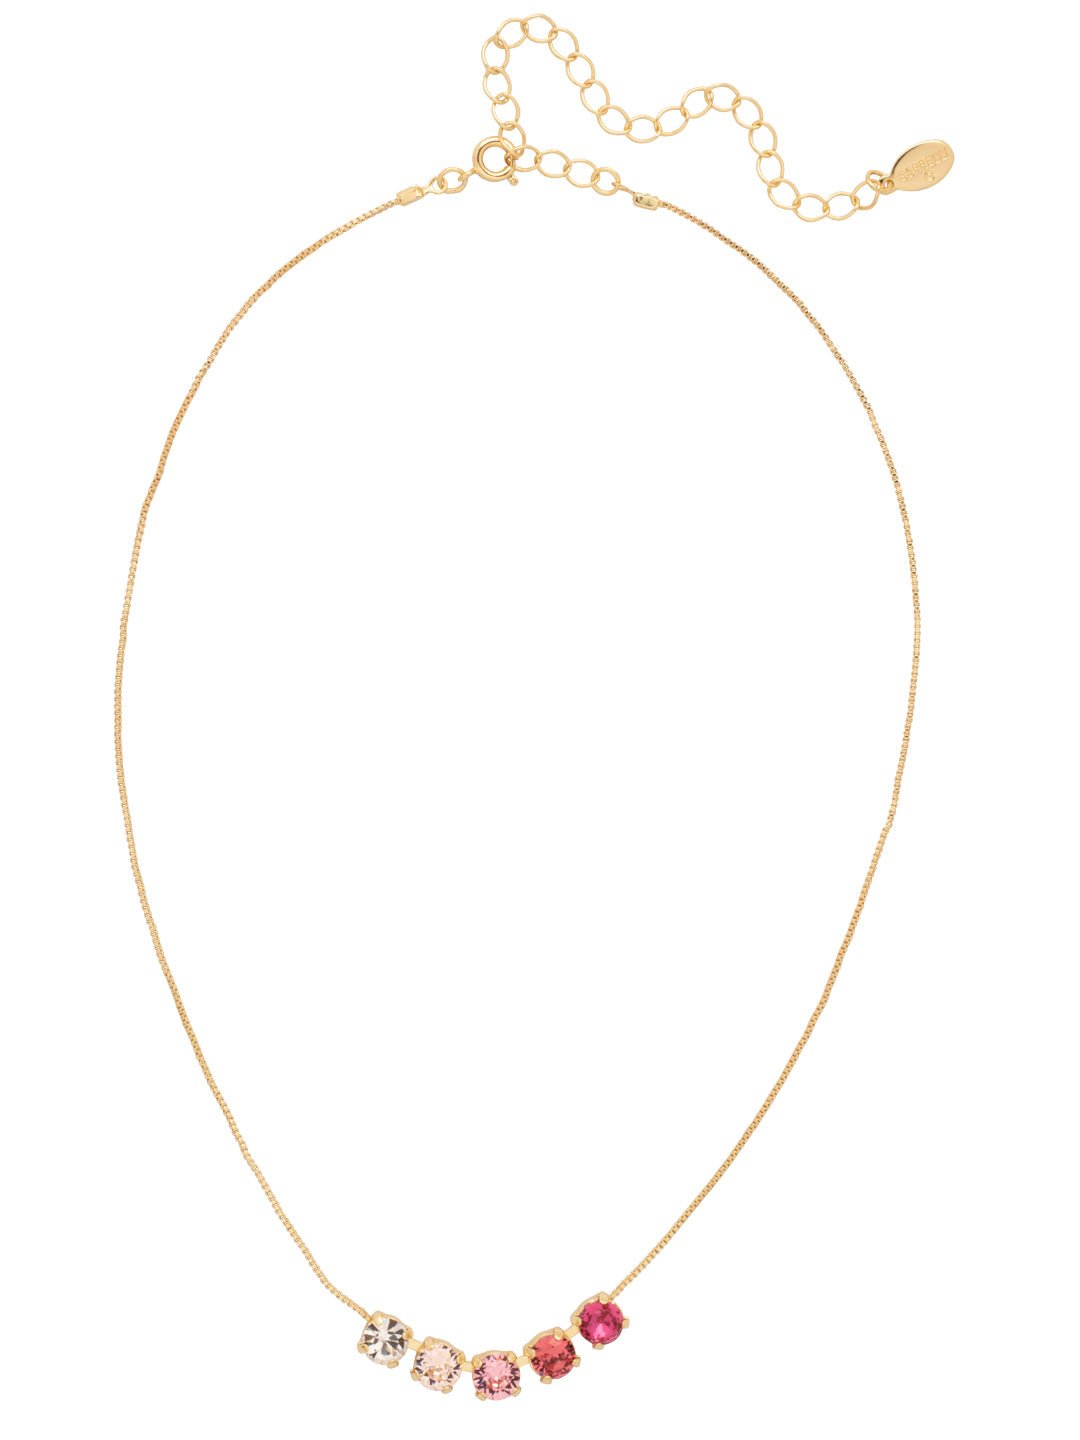 Shaughna Tennis Necklace - NFC84BGBFL - <p>The Shaughna Tennis Necklace features five crystals on a delicate adjustable chain. From Sorrelli's Big Flirt collection in our Bright Gold-tone finish.</p>